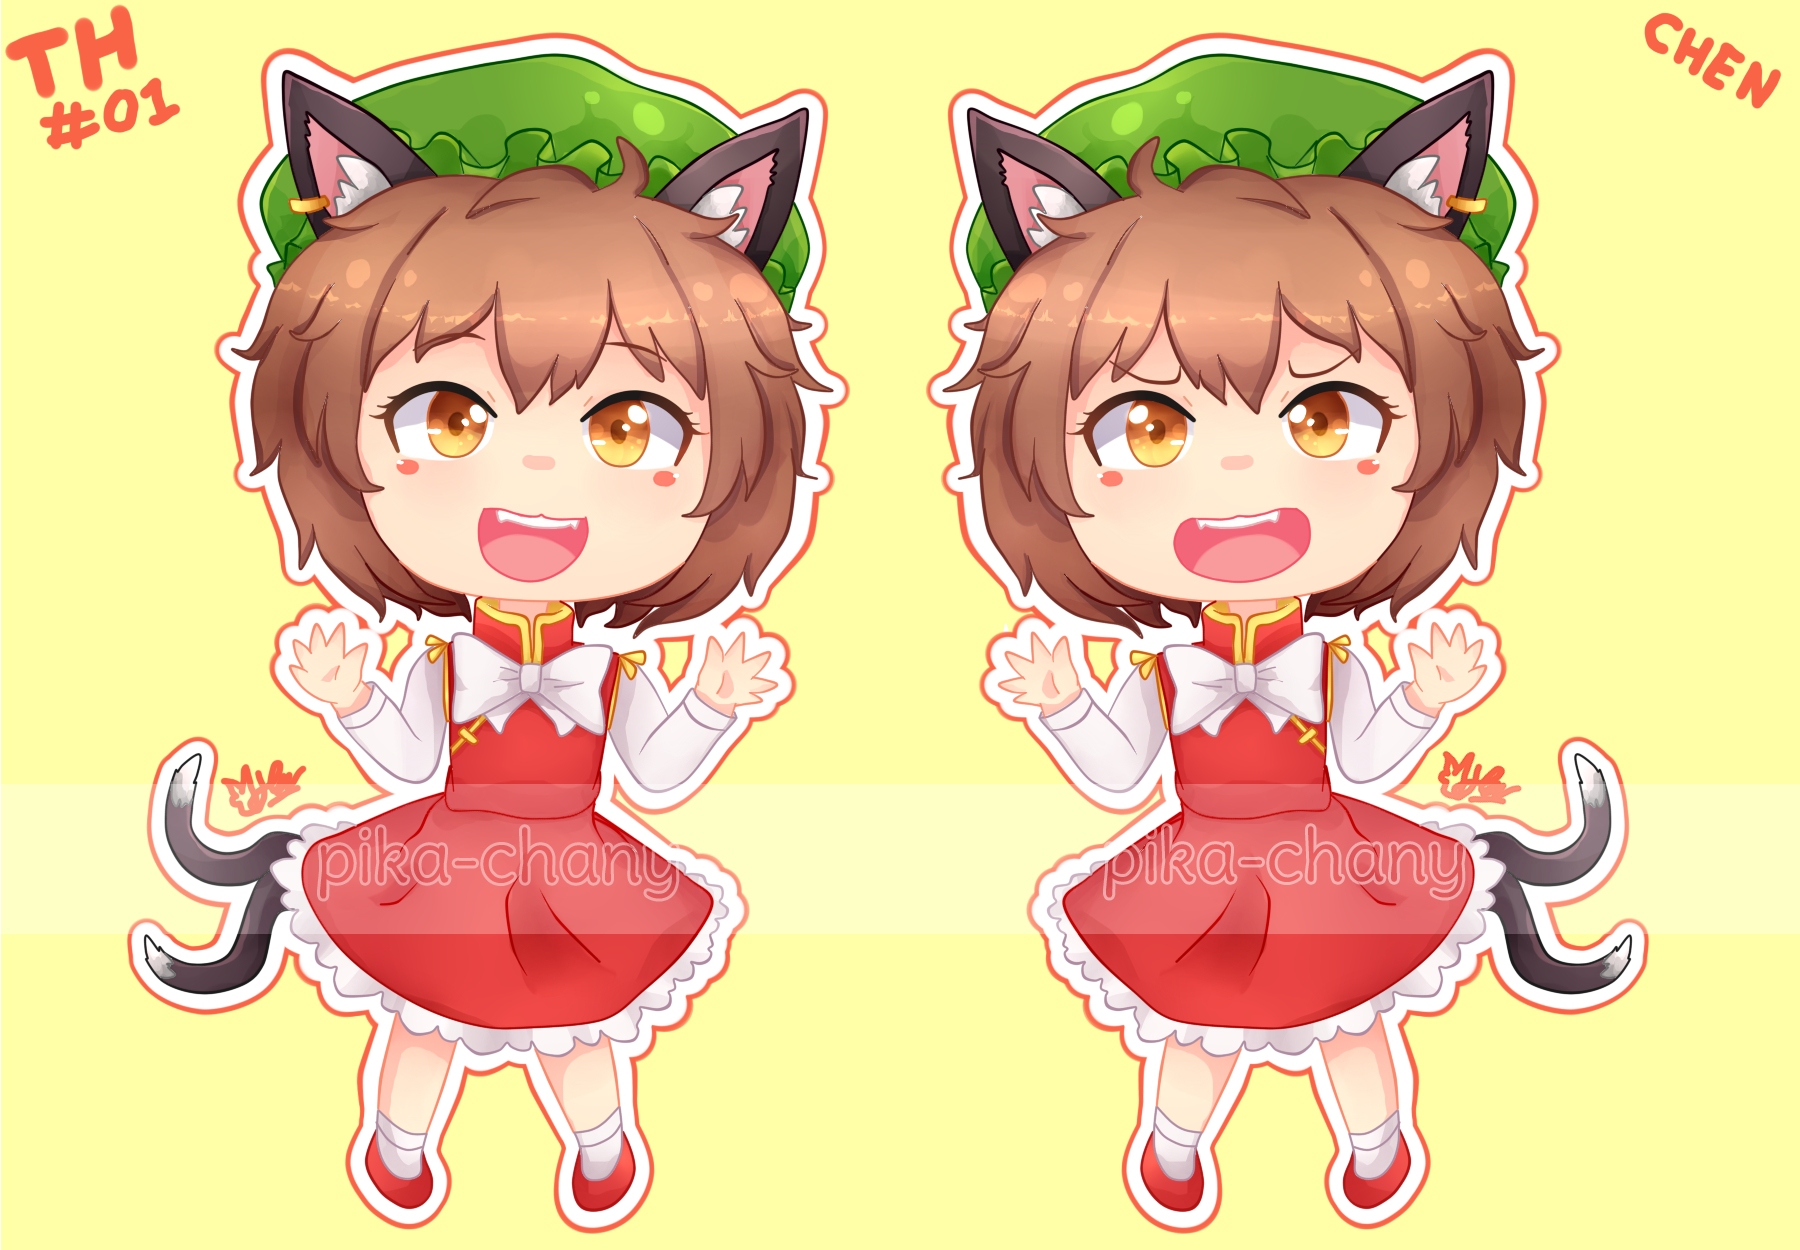 Chen Charms